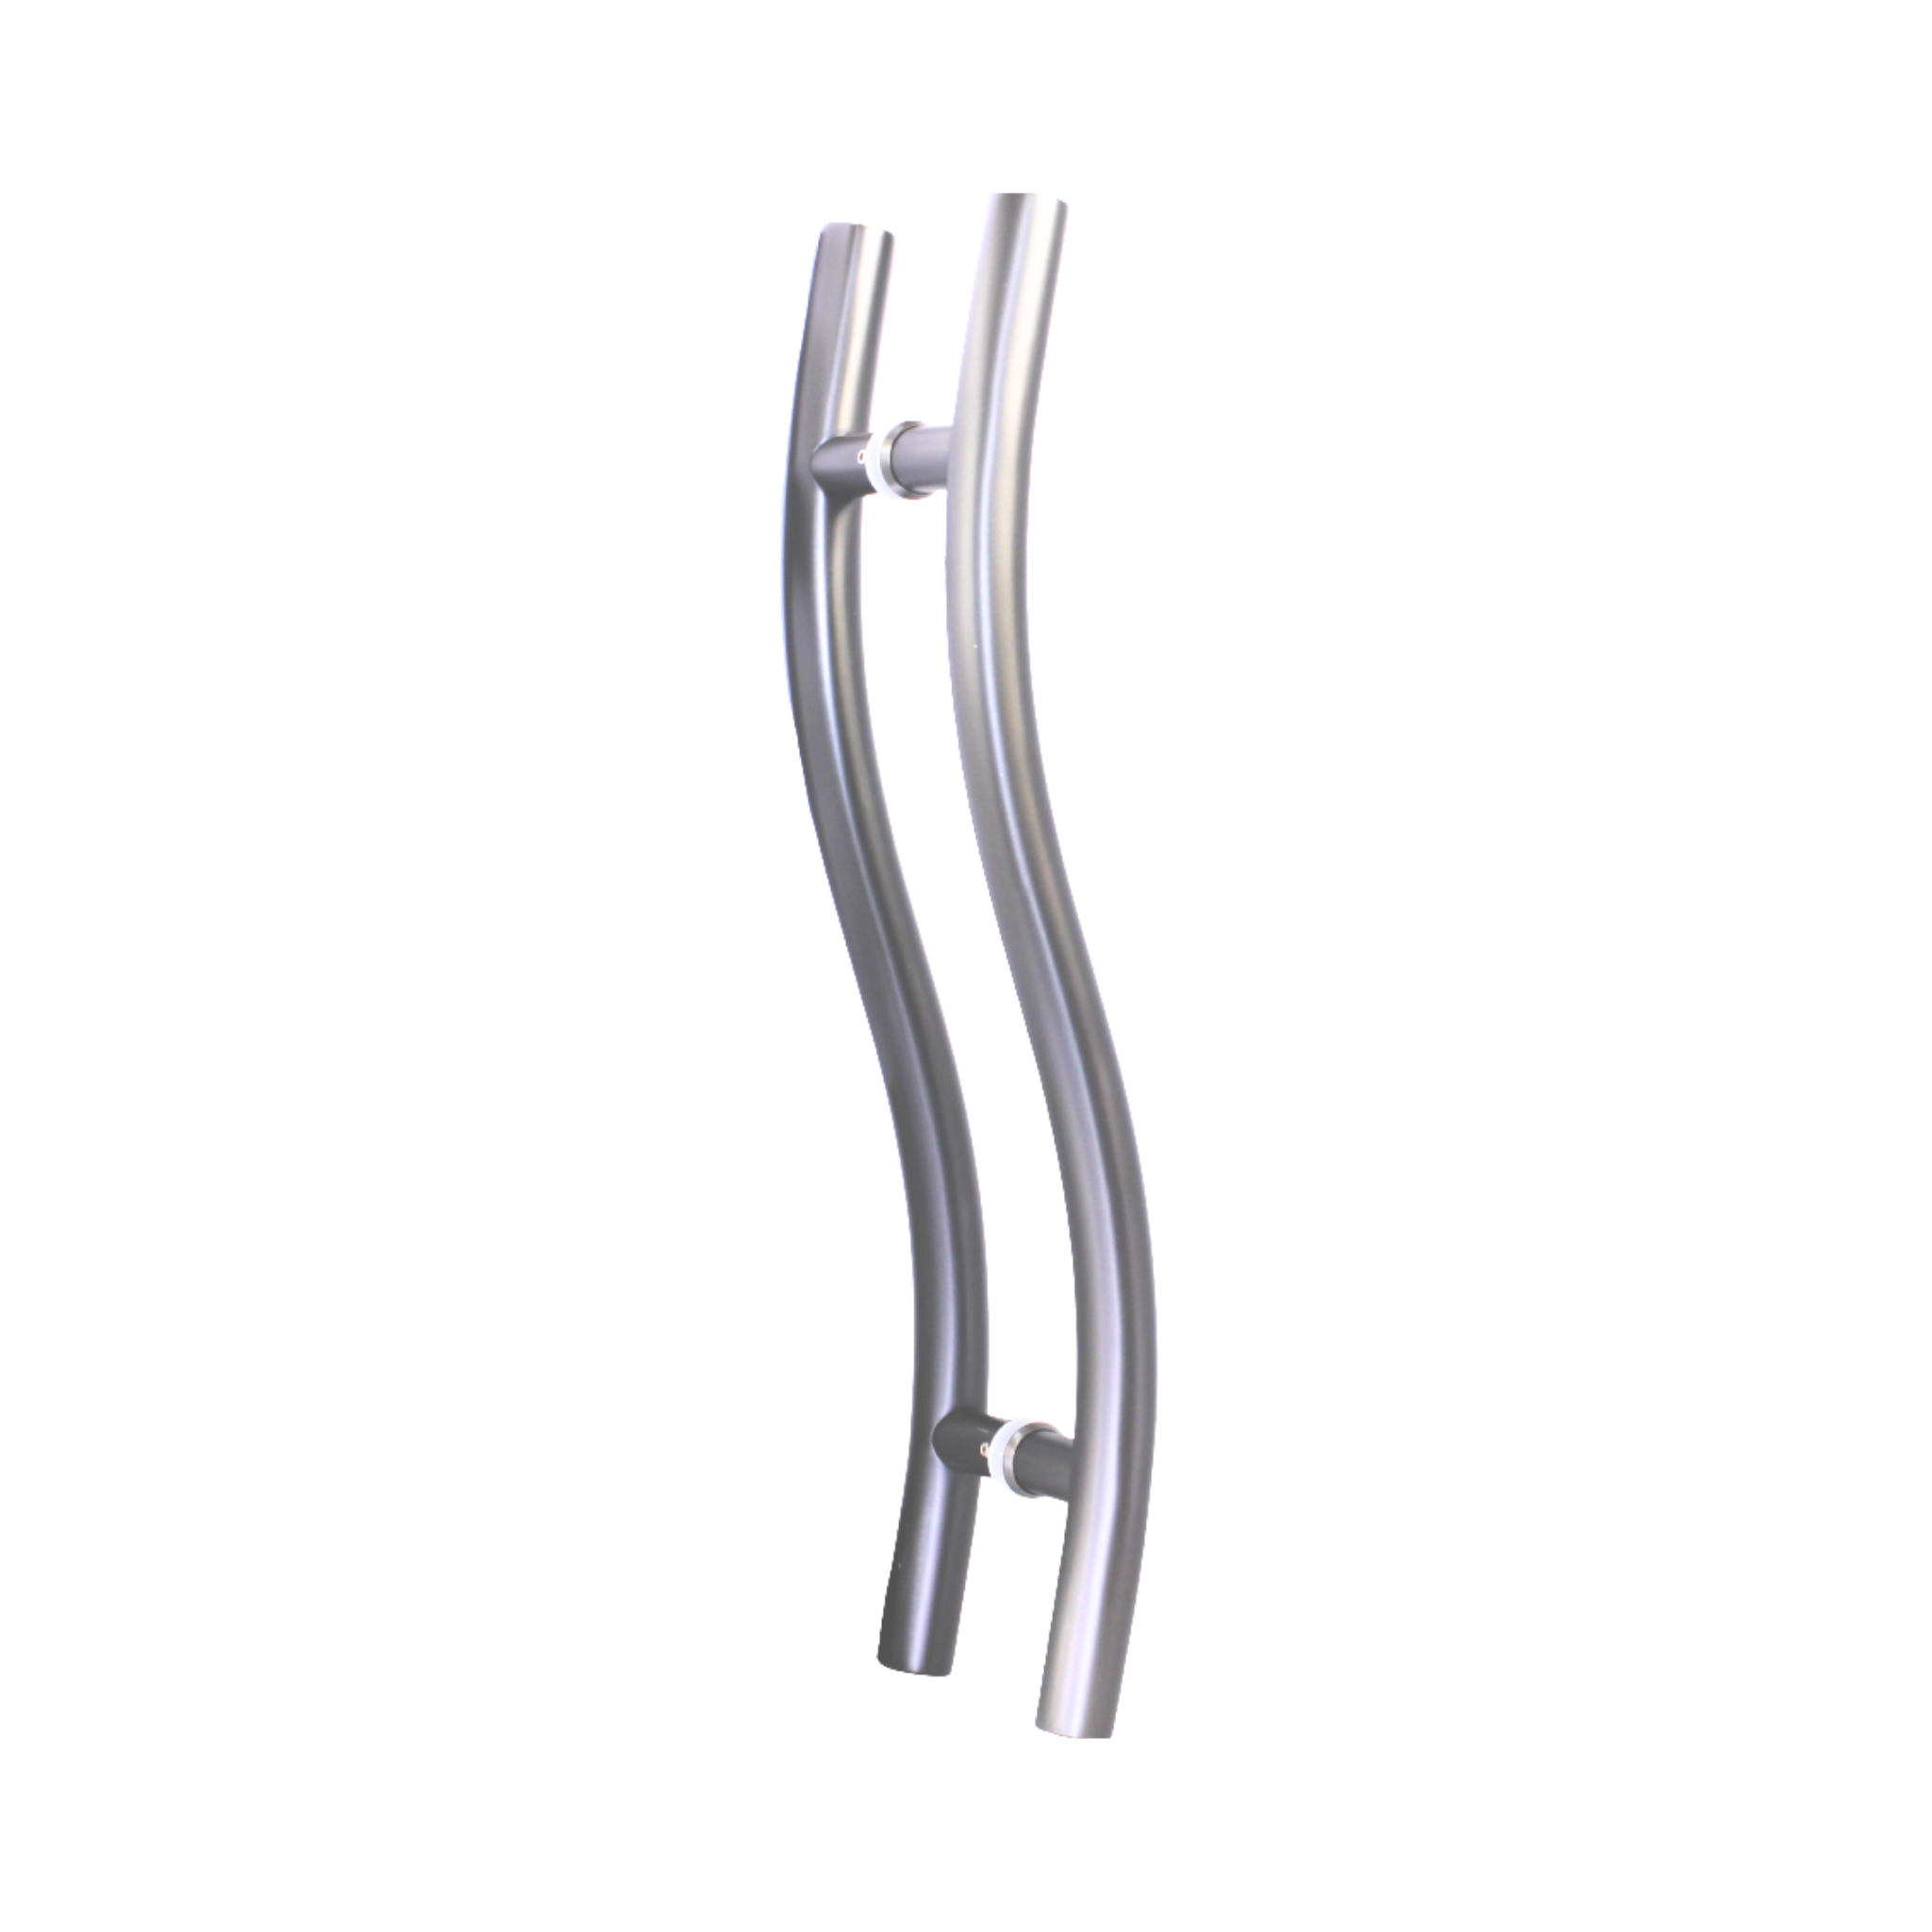 FP.S01.BB.TR, Pull Handle, Tubular, S Handle, BTB, 25mm (Ø) x 600mm (l) x 400mm (ctc), Stainless Steel with Tarnish Resistant, CISA